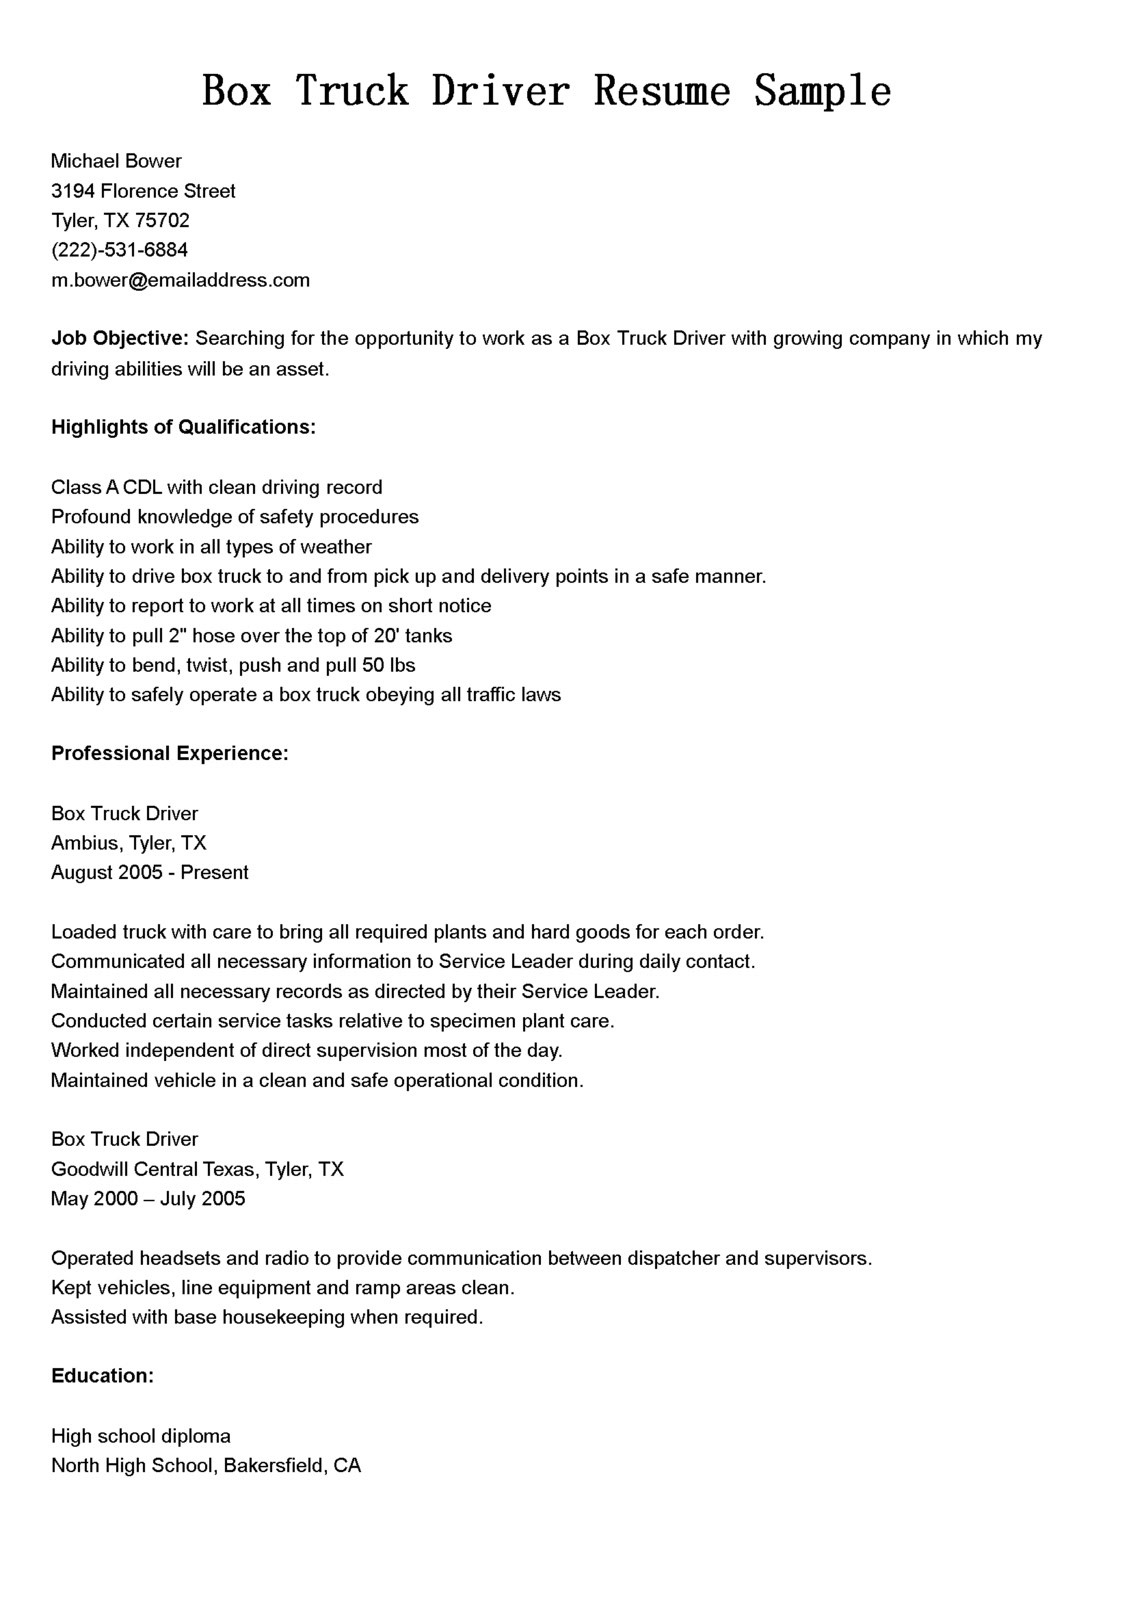 Resume Samples for Truck Drivers with An Objective Driver Resumes: Box Truck Driver Resume Sample